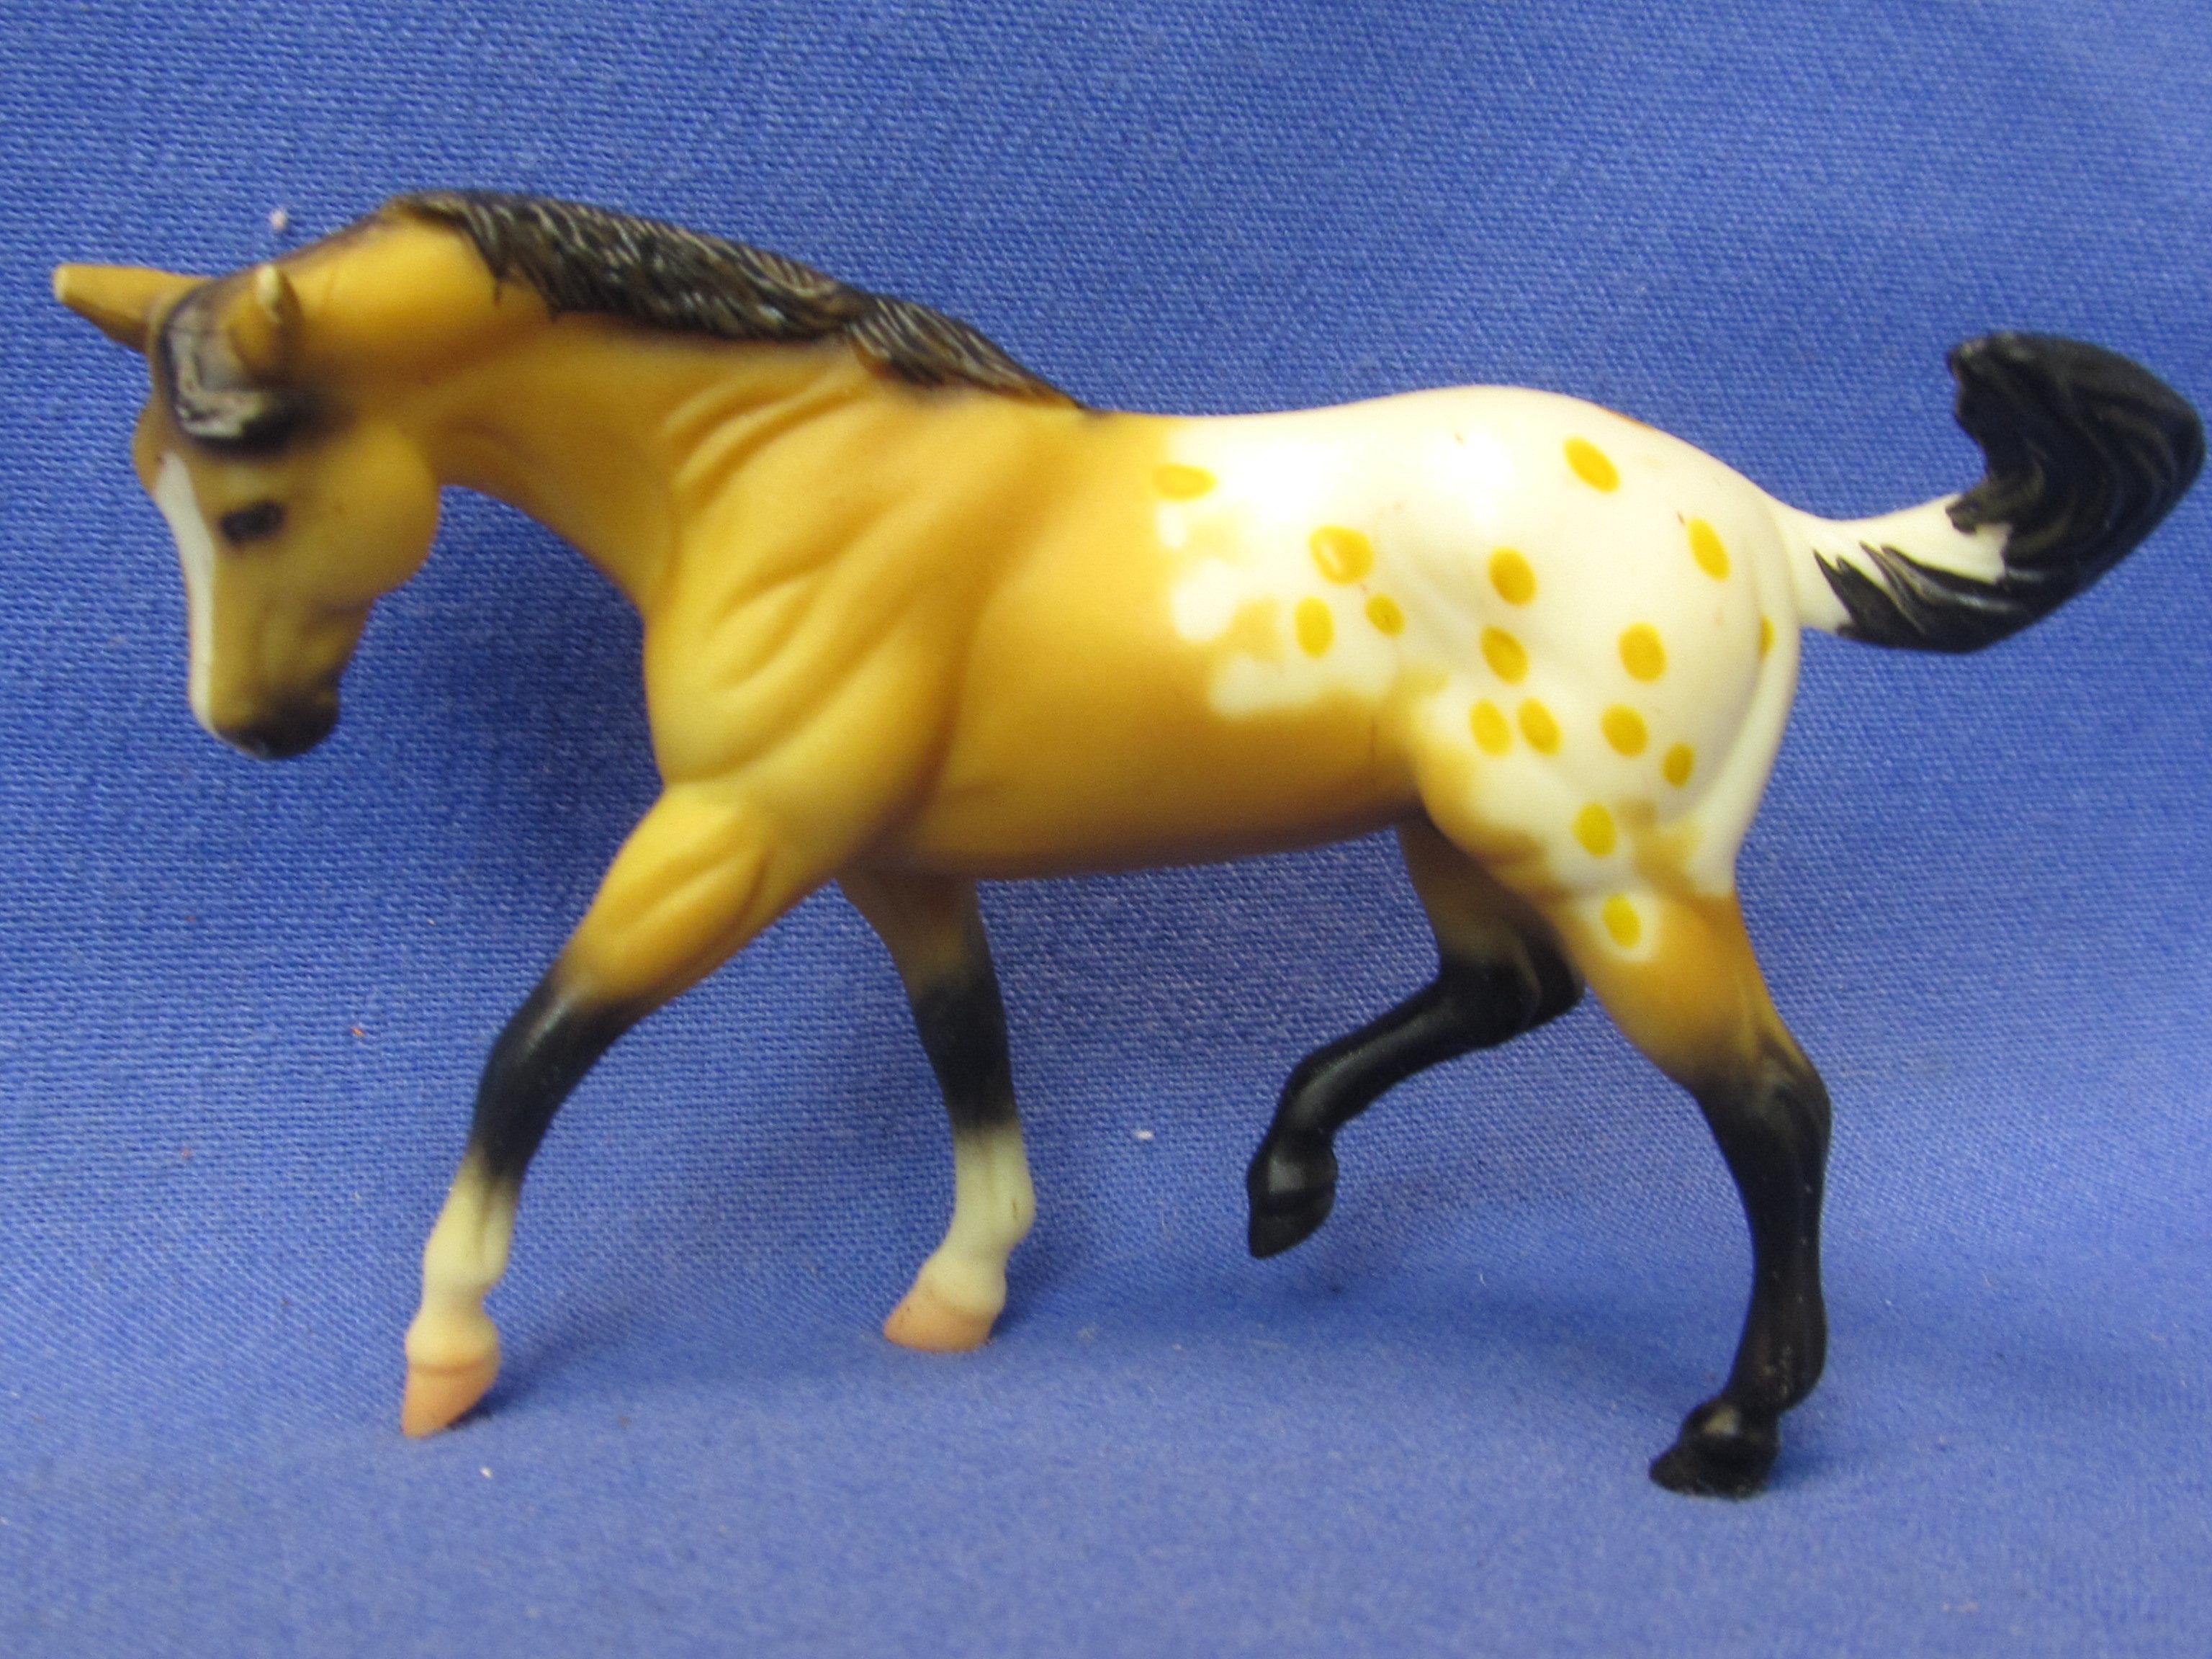 3 Miniature Breyer Horses – Overall Good-Very Good Condition 3”, 2 3/4” & 2” Tall – As in Photos